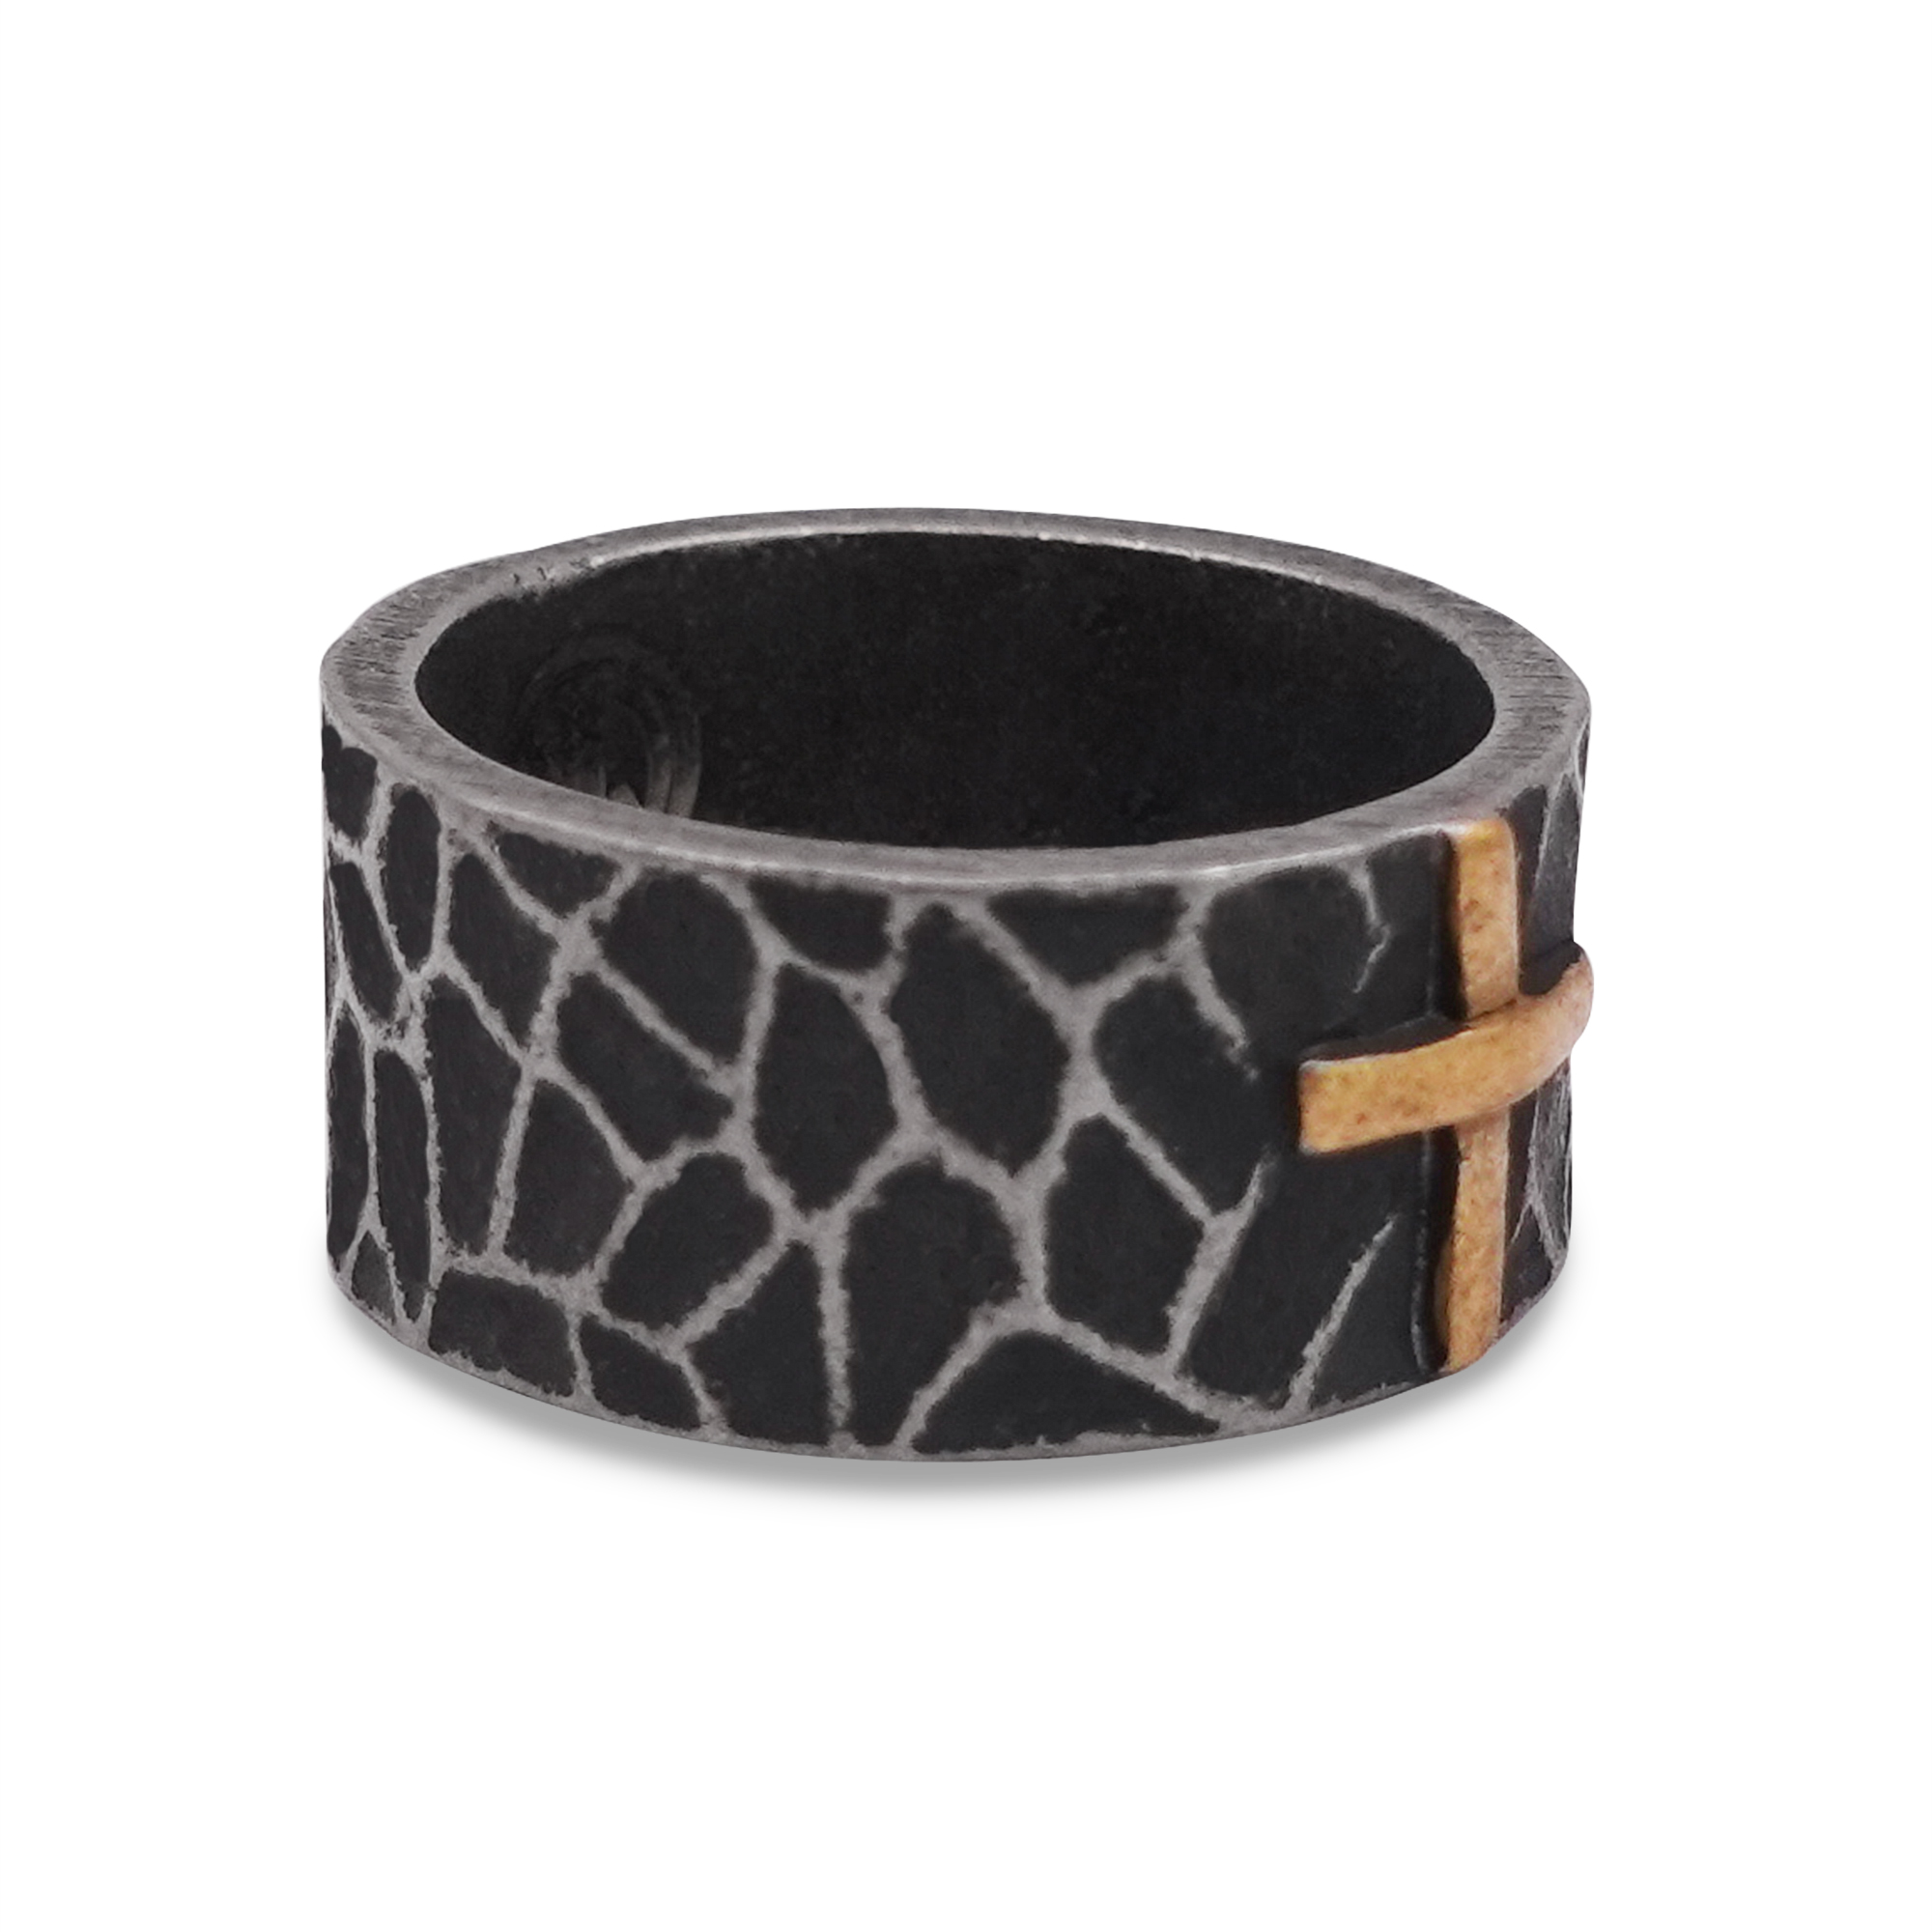 Aged Steel Hammered Signet Ring with Gold Cross